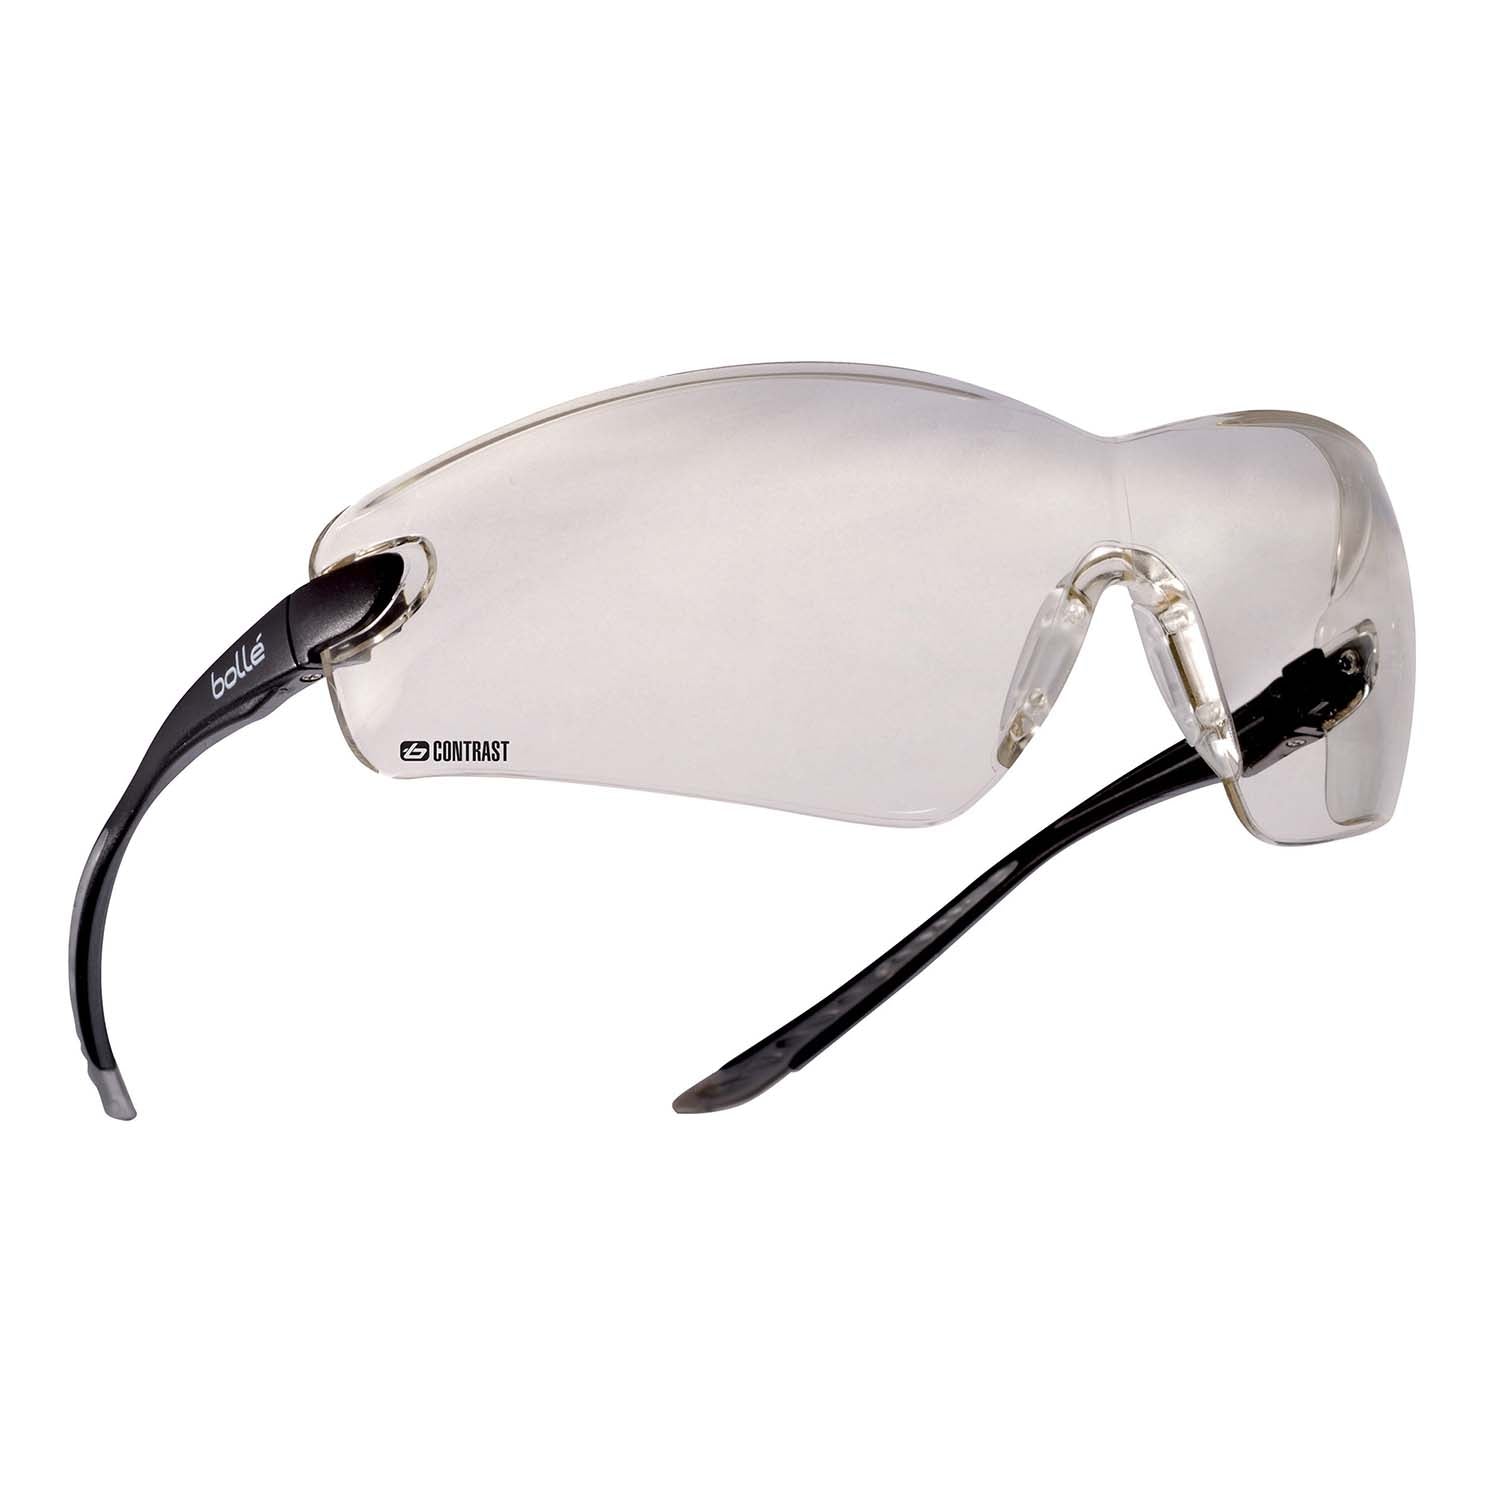 Bolle COBRA Contrast Safety Glasses - COBCONT